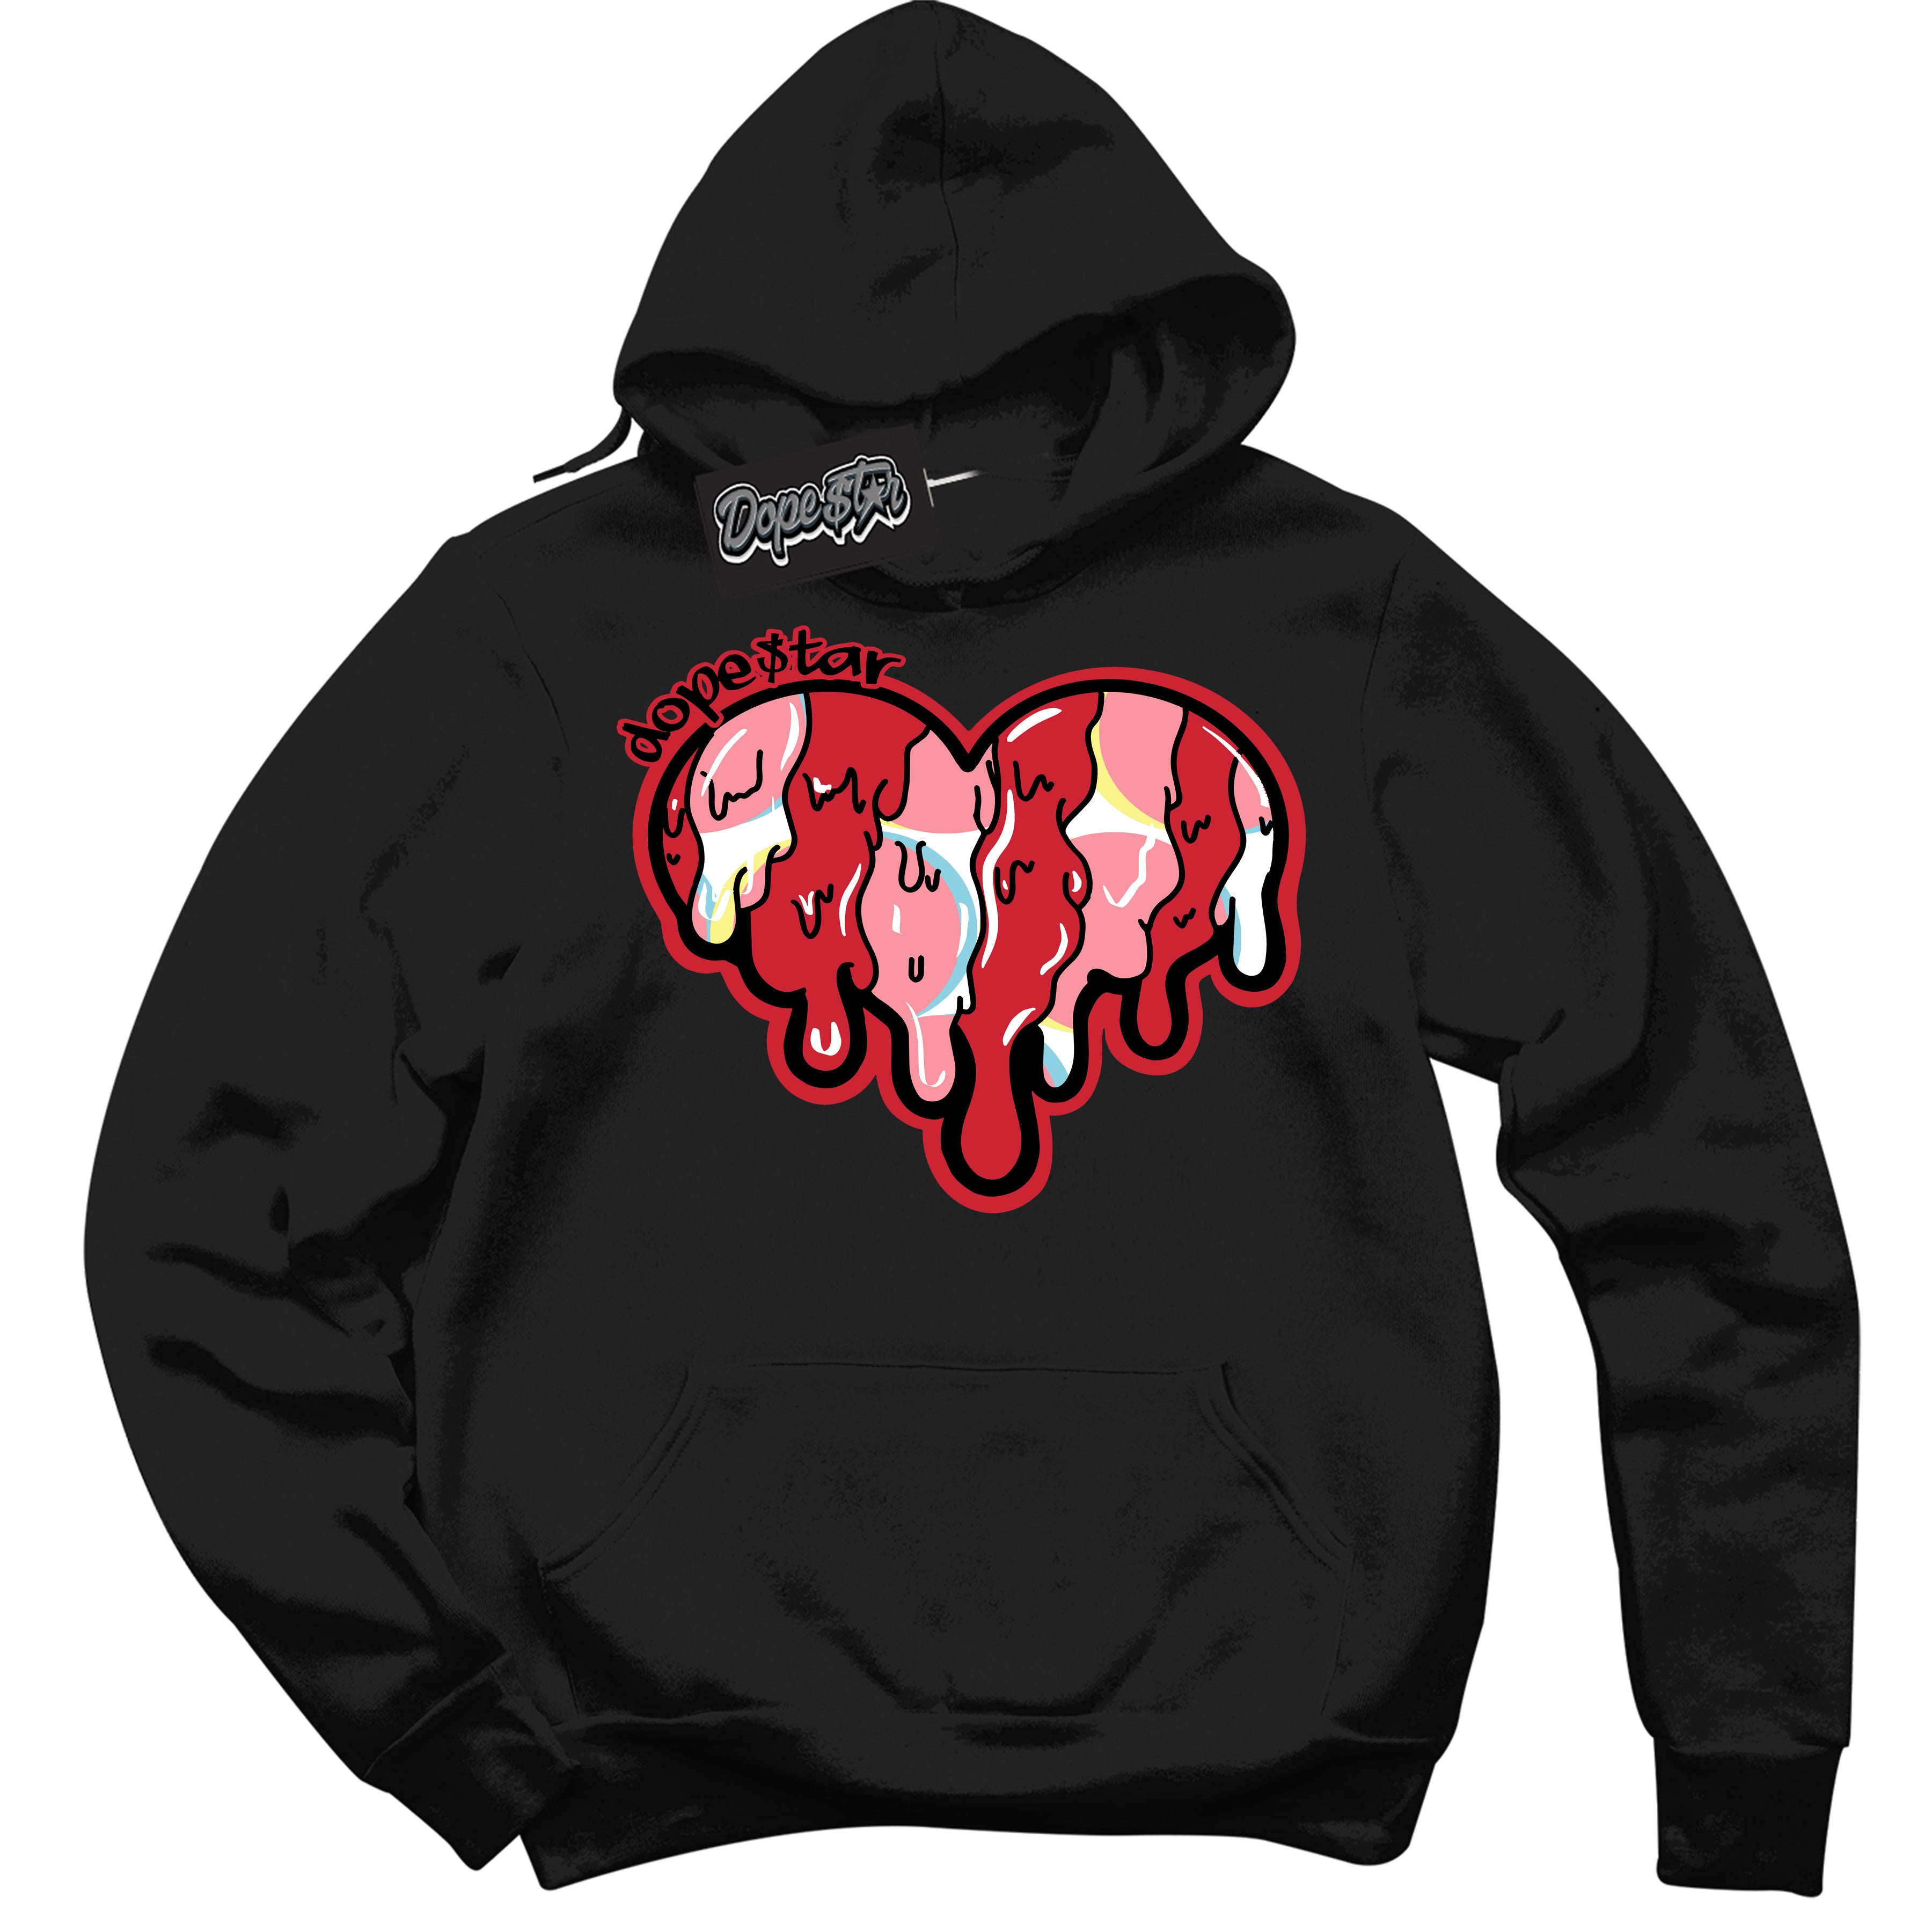 Cool Black Graphic DopeStar Hoodie with “ Melting Heart “ print, that perfectly matches Spider-Verse 1s sneakers